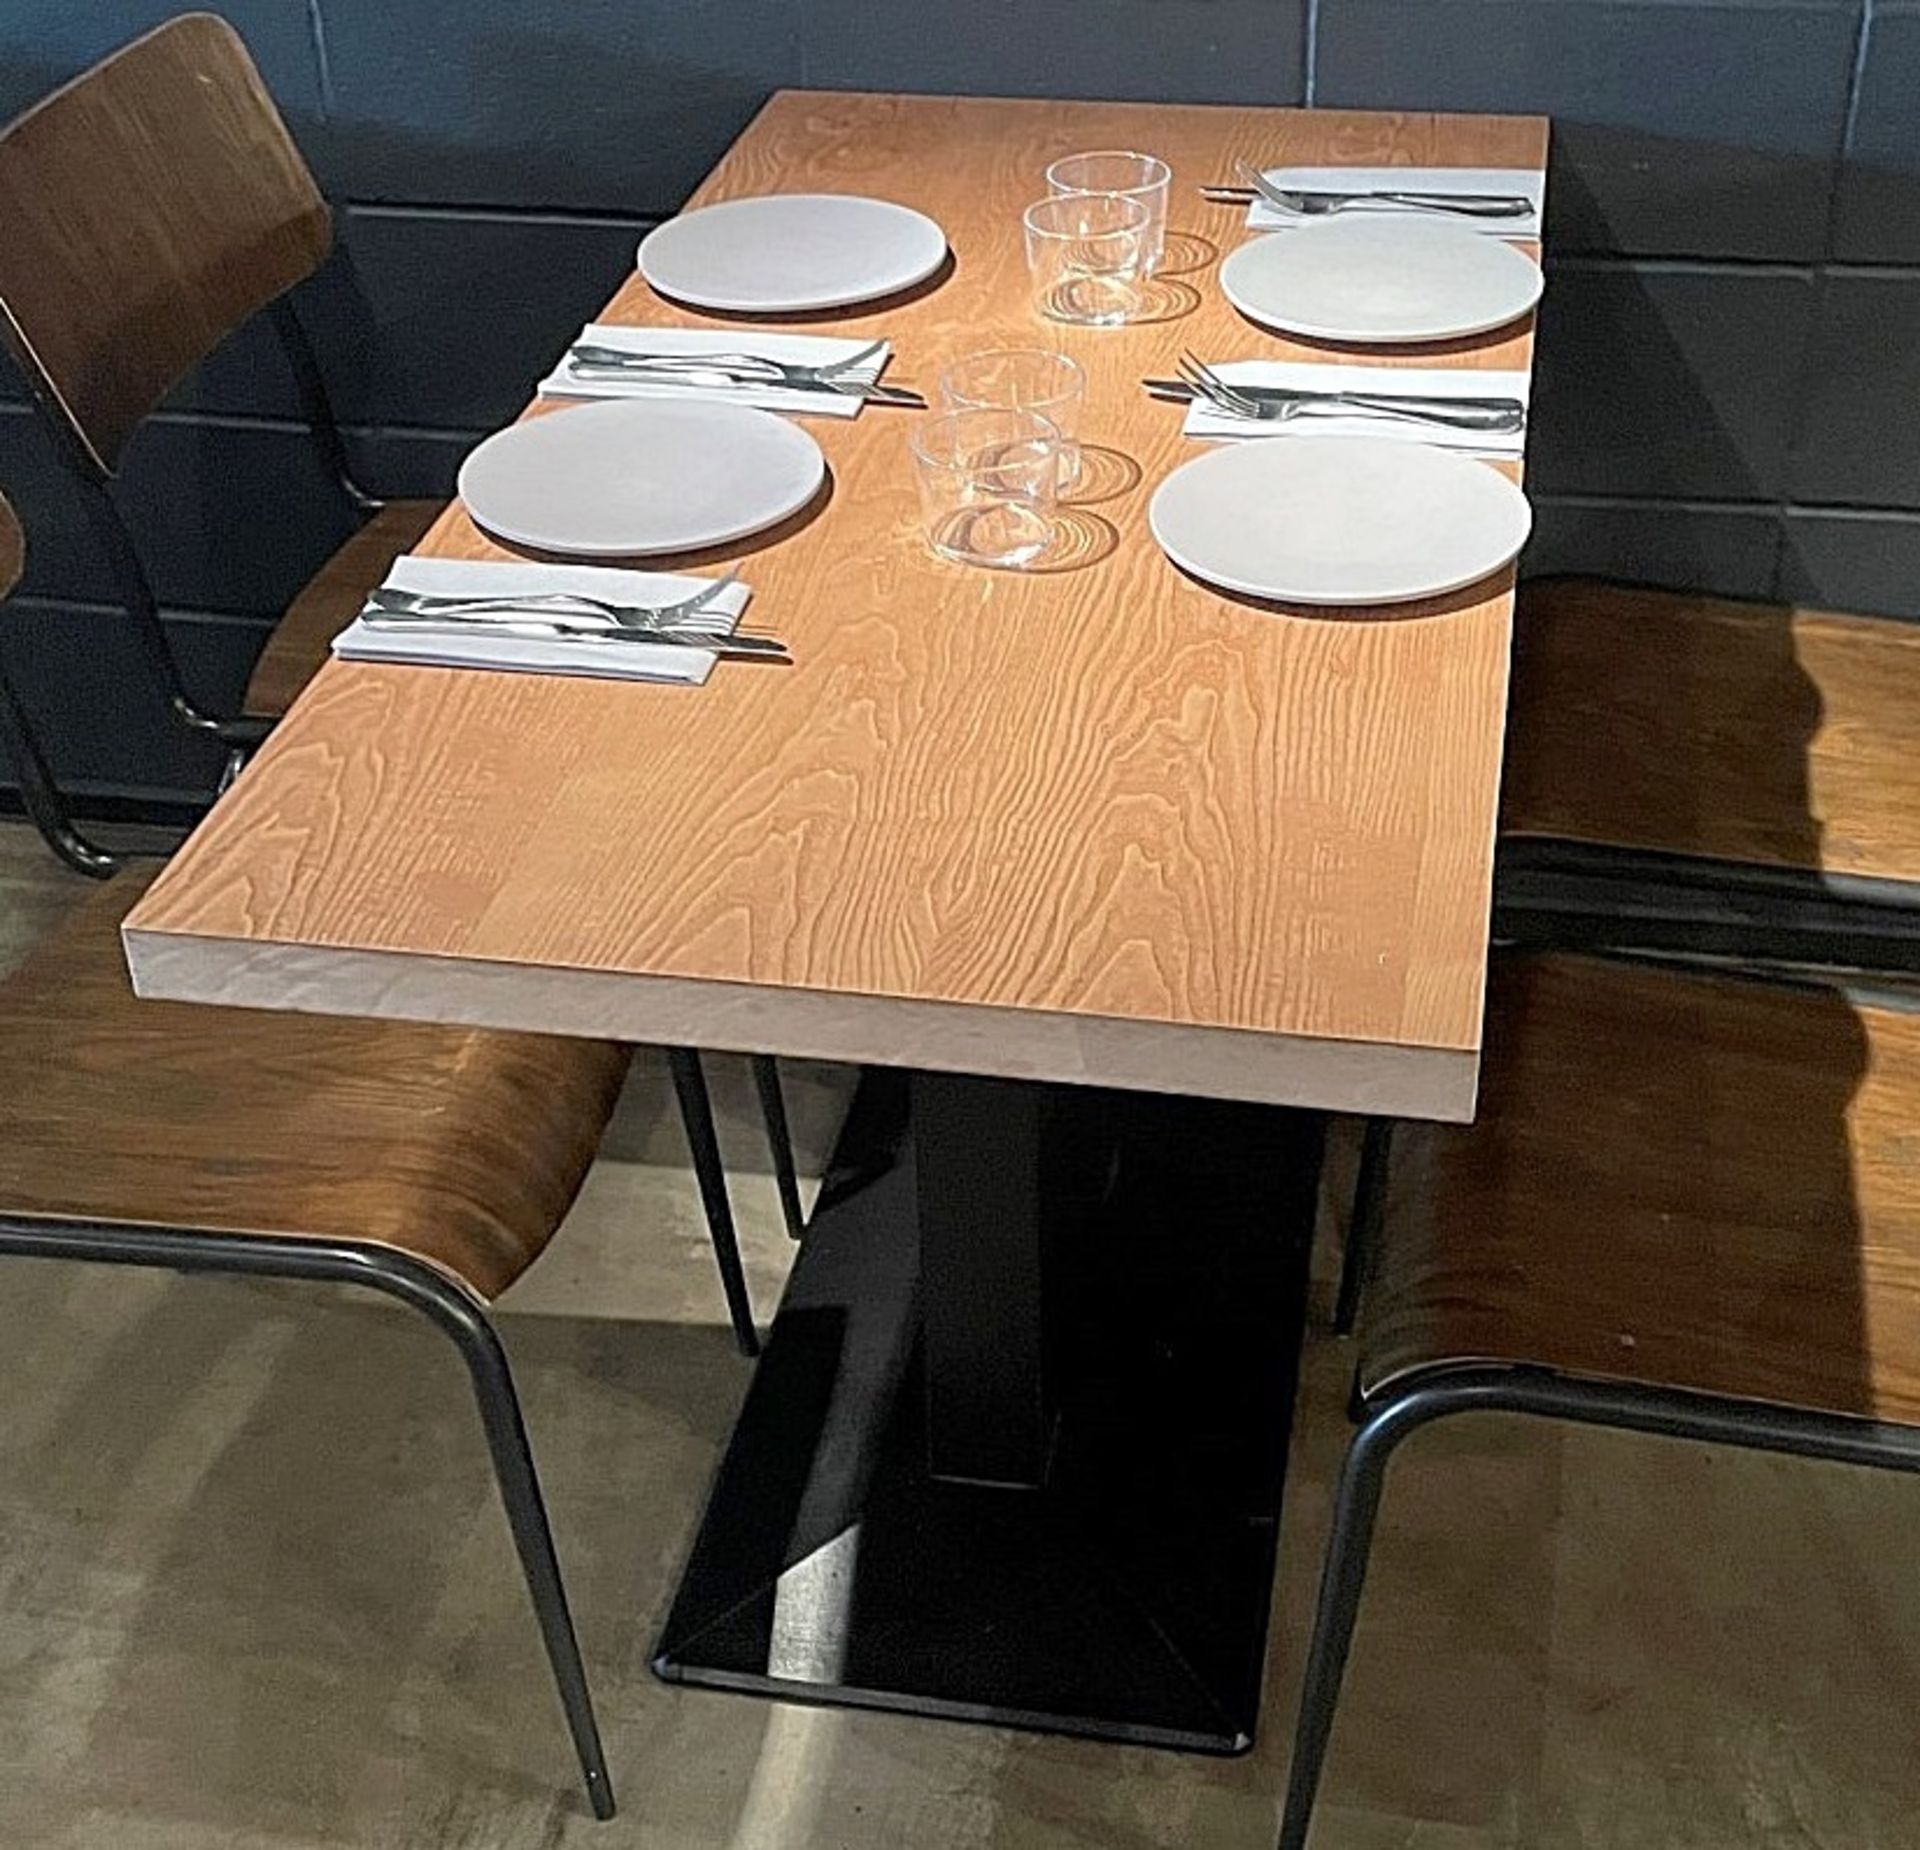 3 x Rectangular Wood-Topped Bistro Tables With Sturdy Metal Bases - Dimensions (approx): 120 x 60 - Image 2 of 2